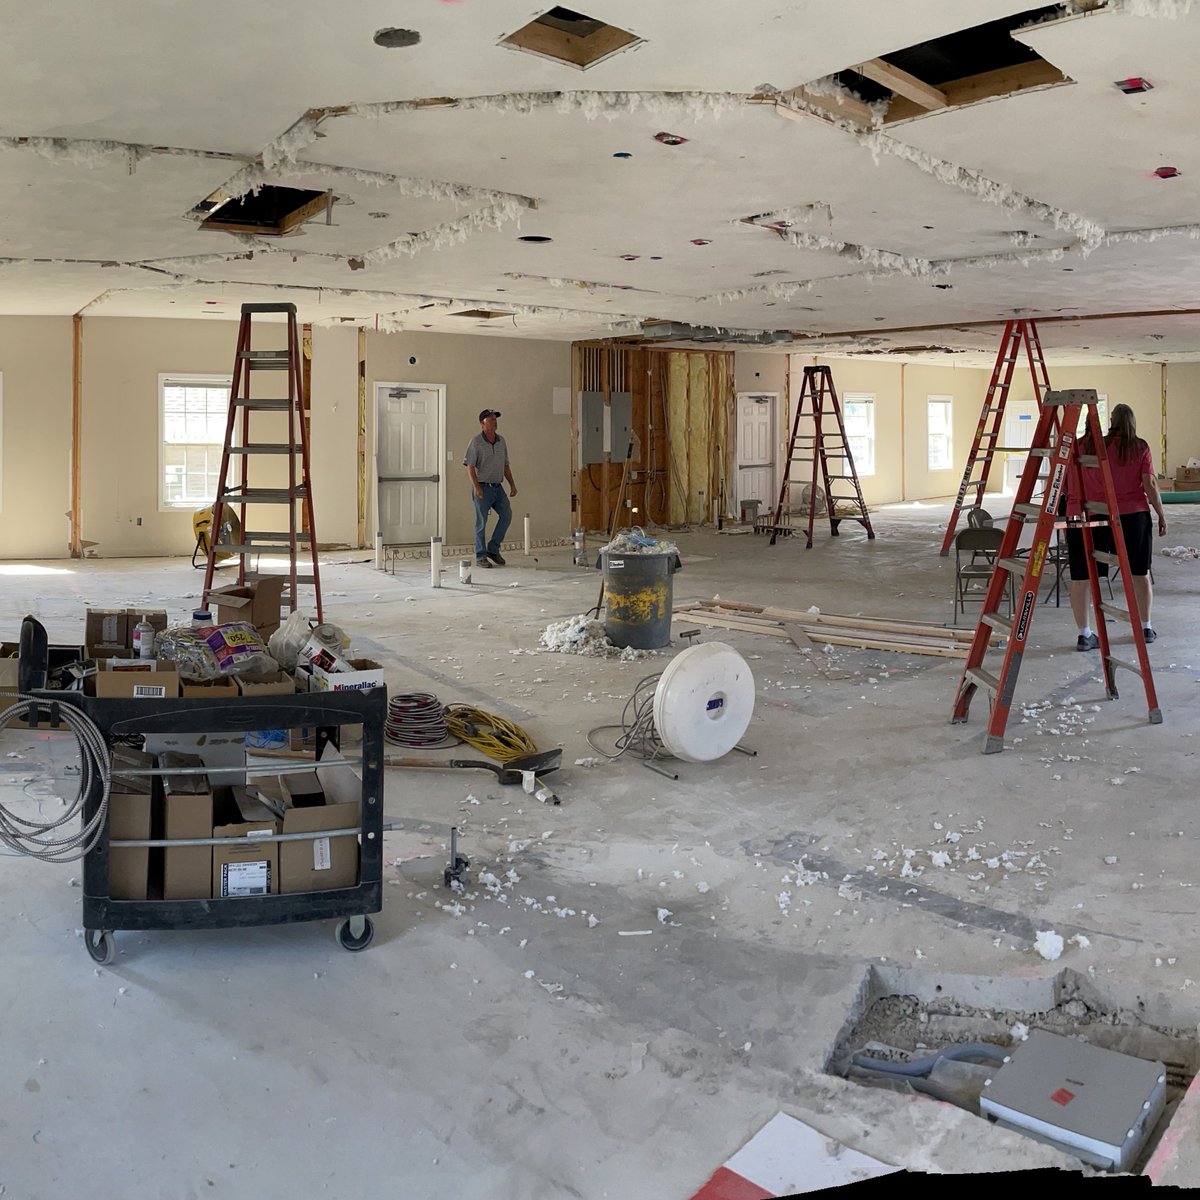 Work is progressing on the new Maryville Community Library in Maryville, IL. We're very proud to be part of helping this community cornerstone enter their next chapter! #librarydesign #librarybuildings